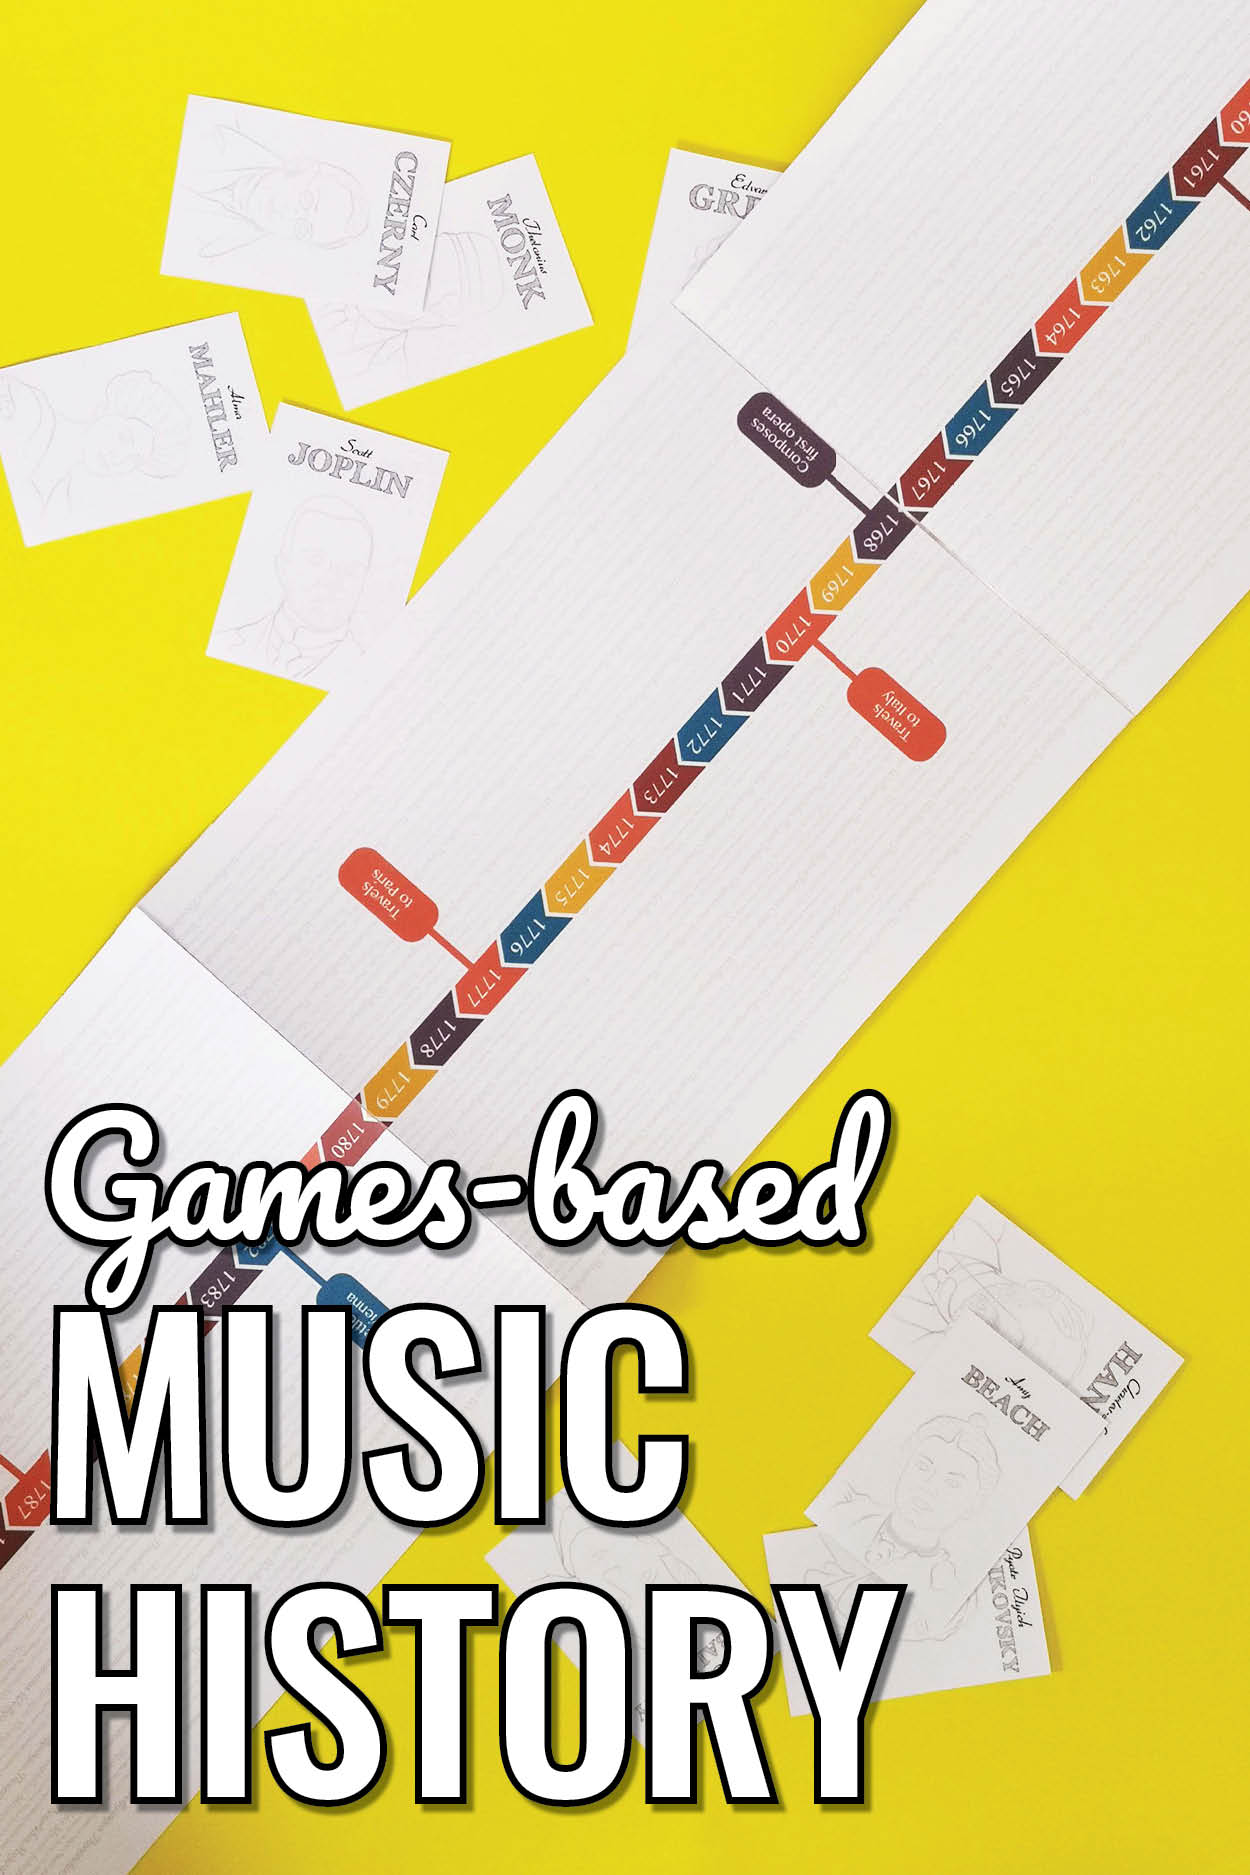 How to teach your students more music history using games and other fun activities.